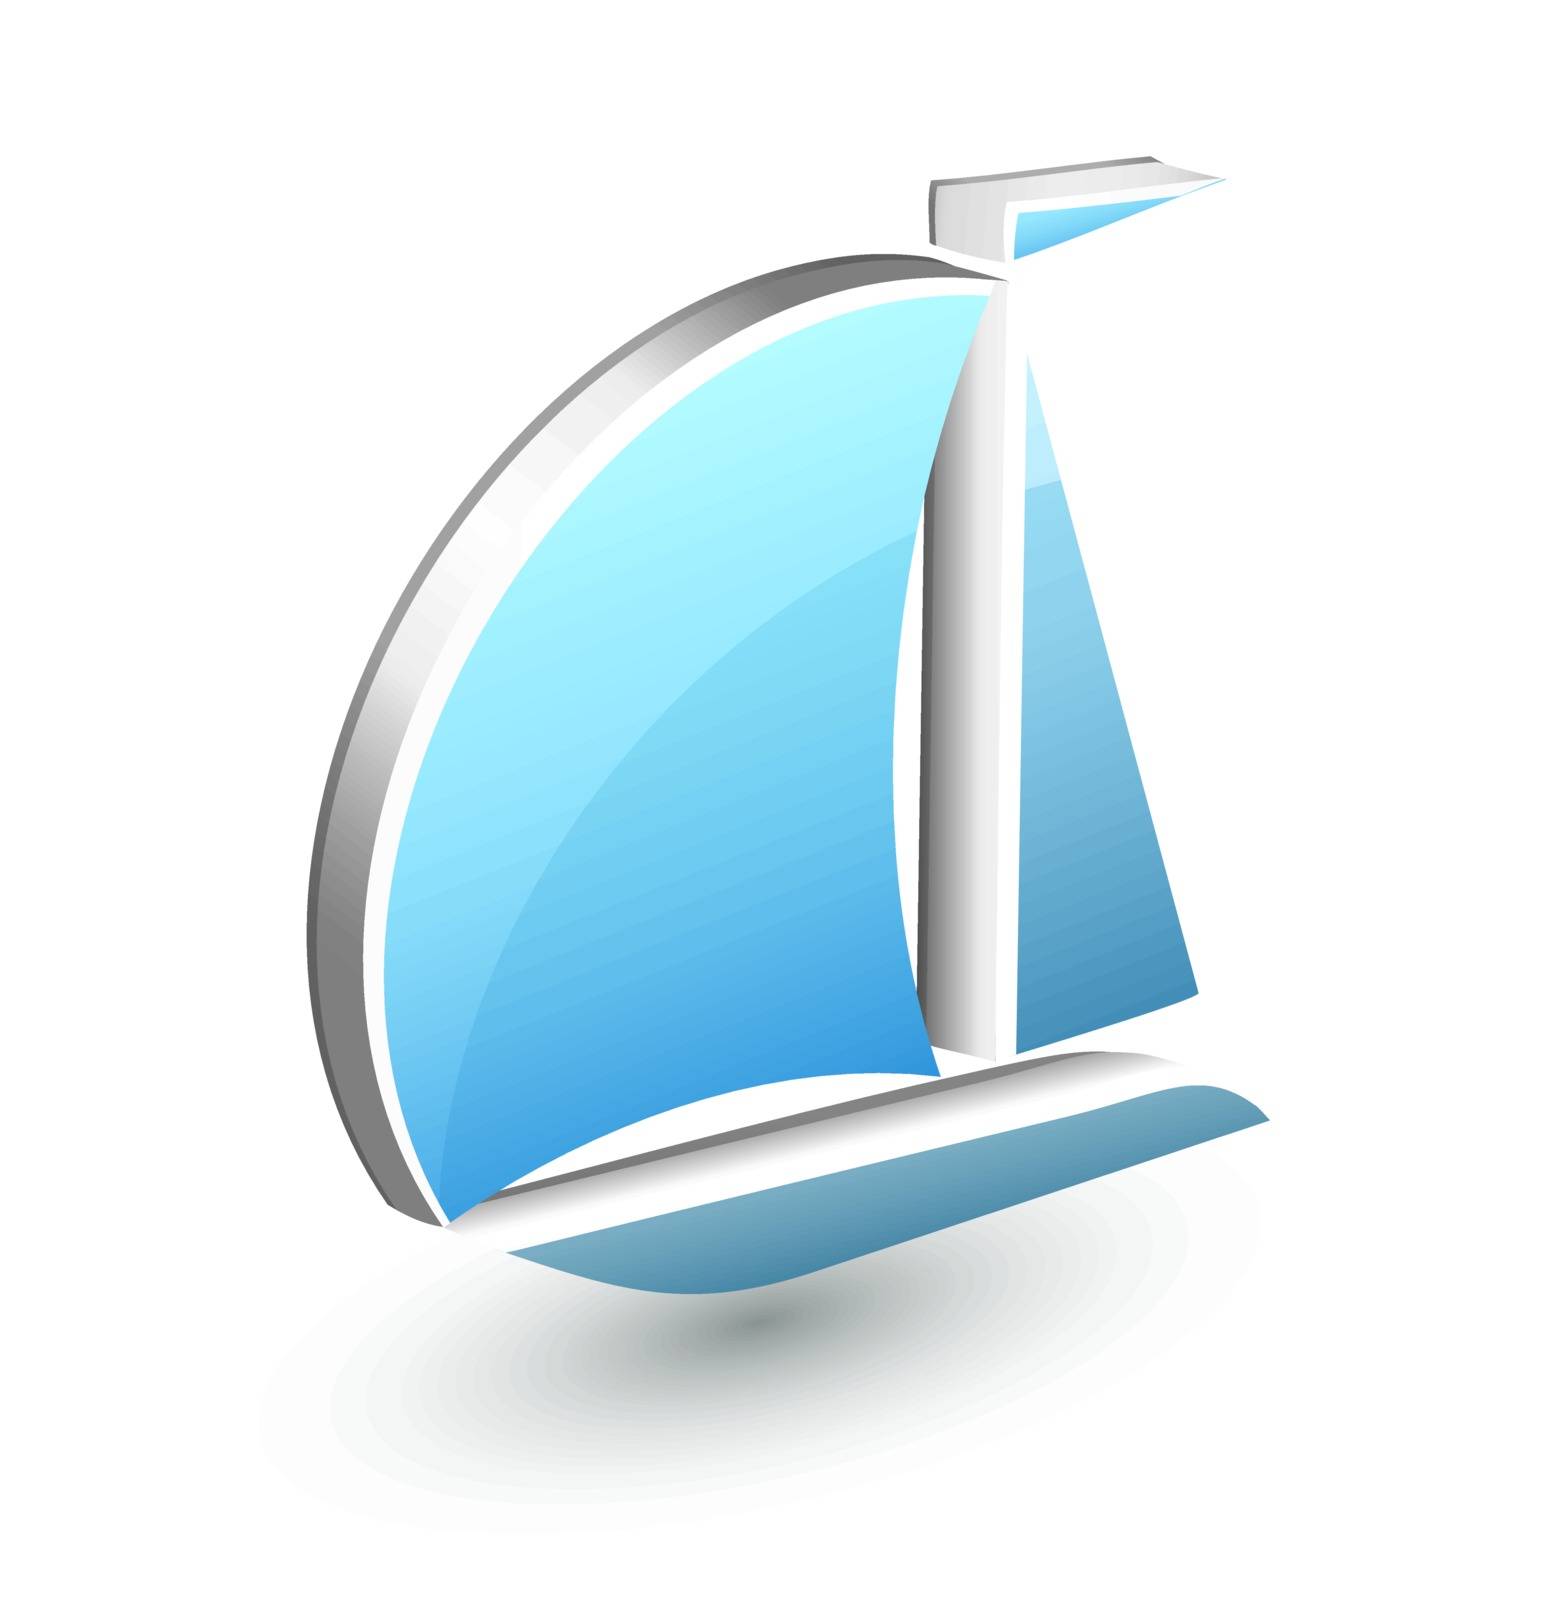 Boat yacht icon 3D online signs and symbols